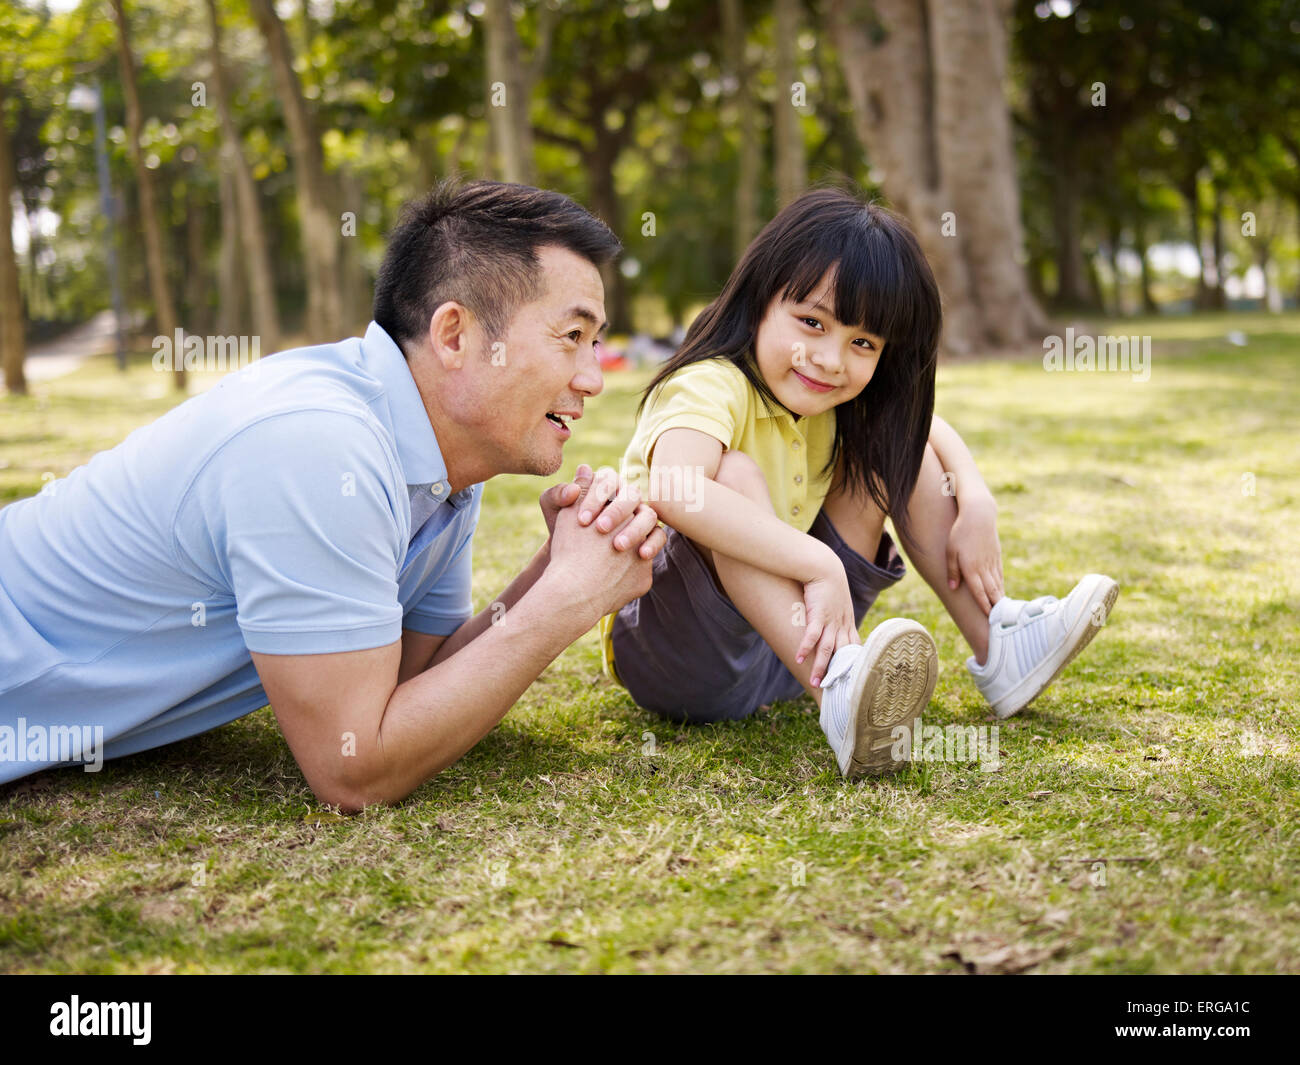 Asian father and daughter outdoors Banque D'Images